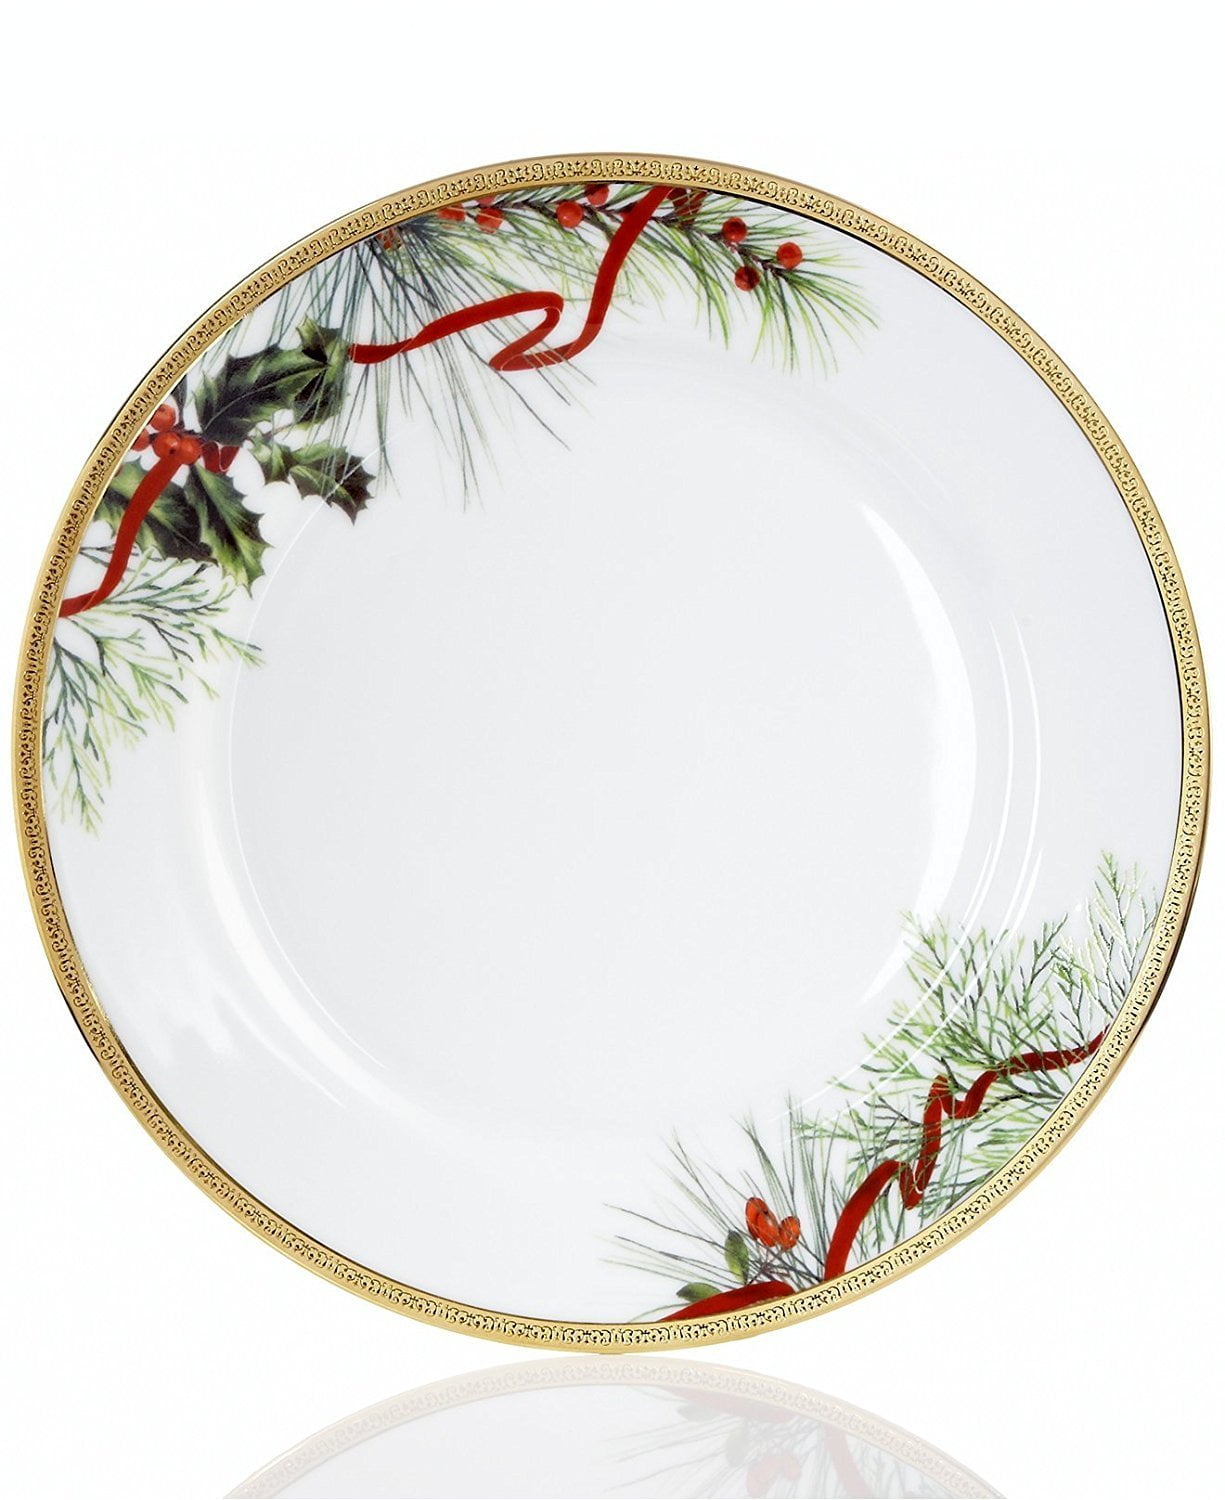 Charter Club Red Berry Set of 6 Salad Plates